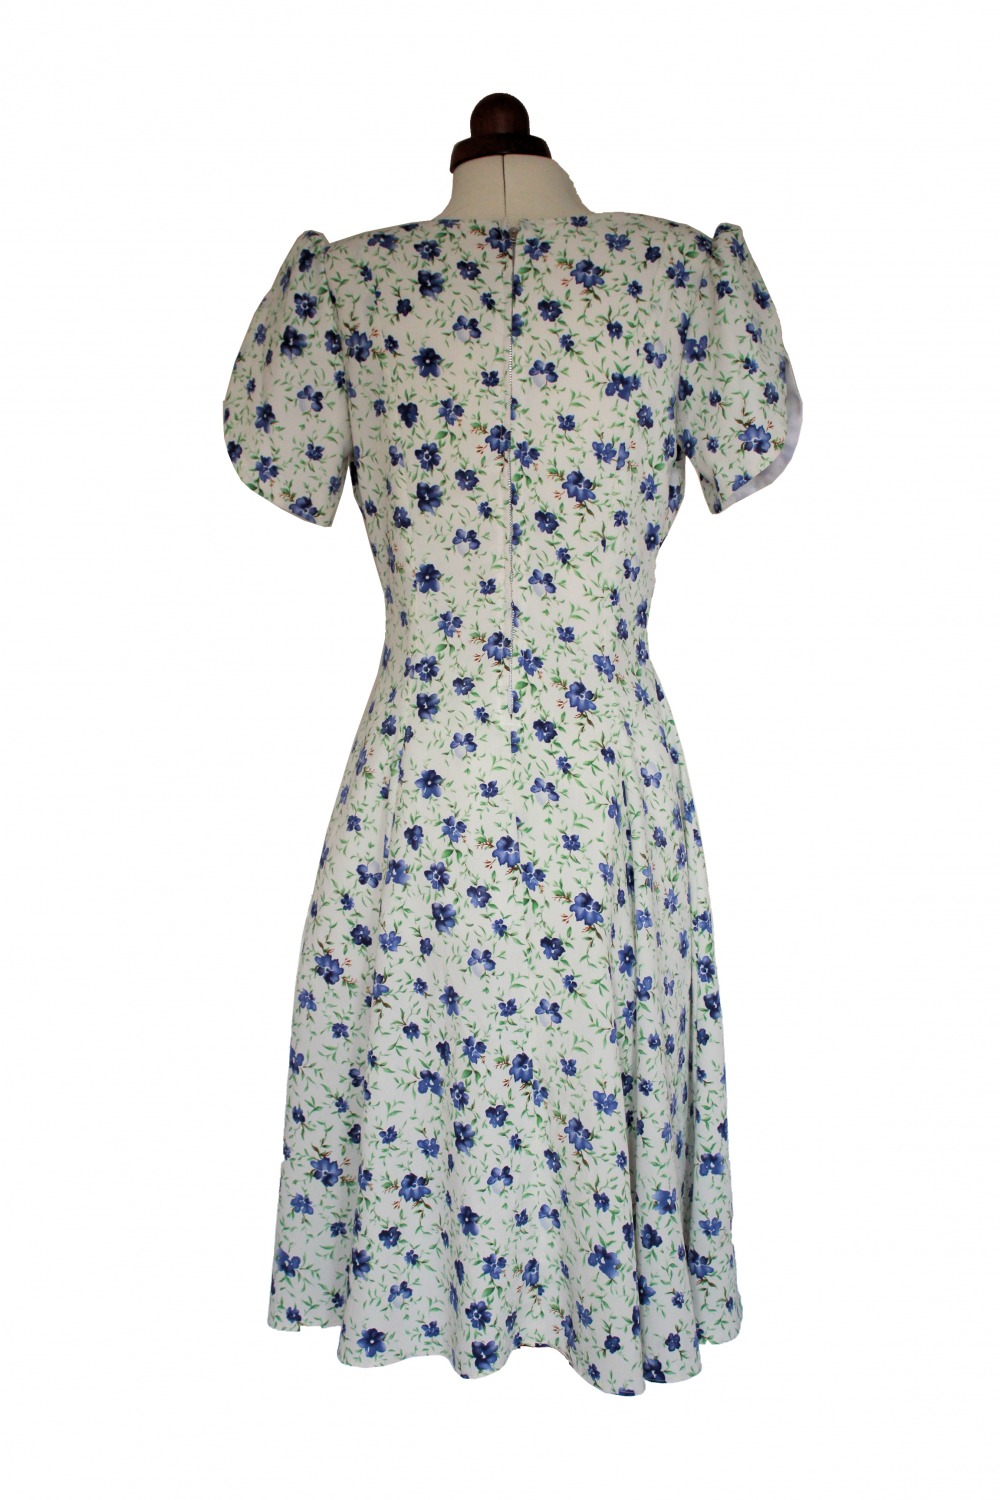 Ladies 1940's Wartime Goodwood Costume Size 10 - 12 Image